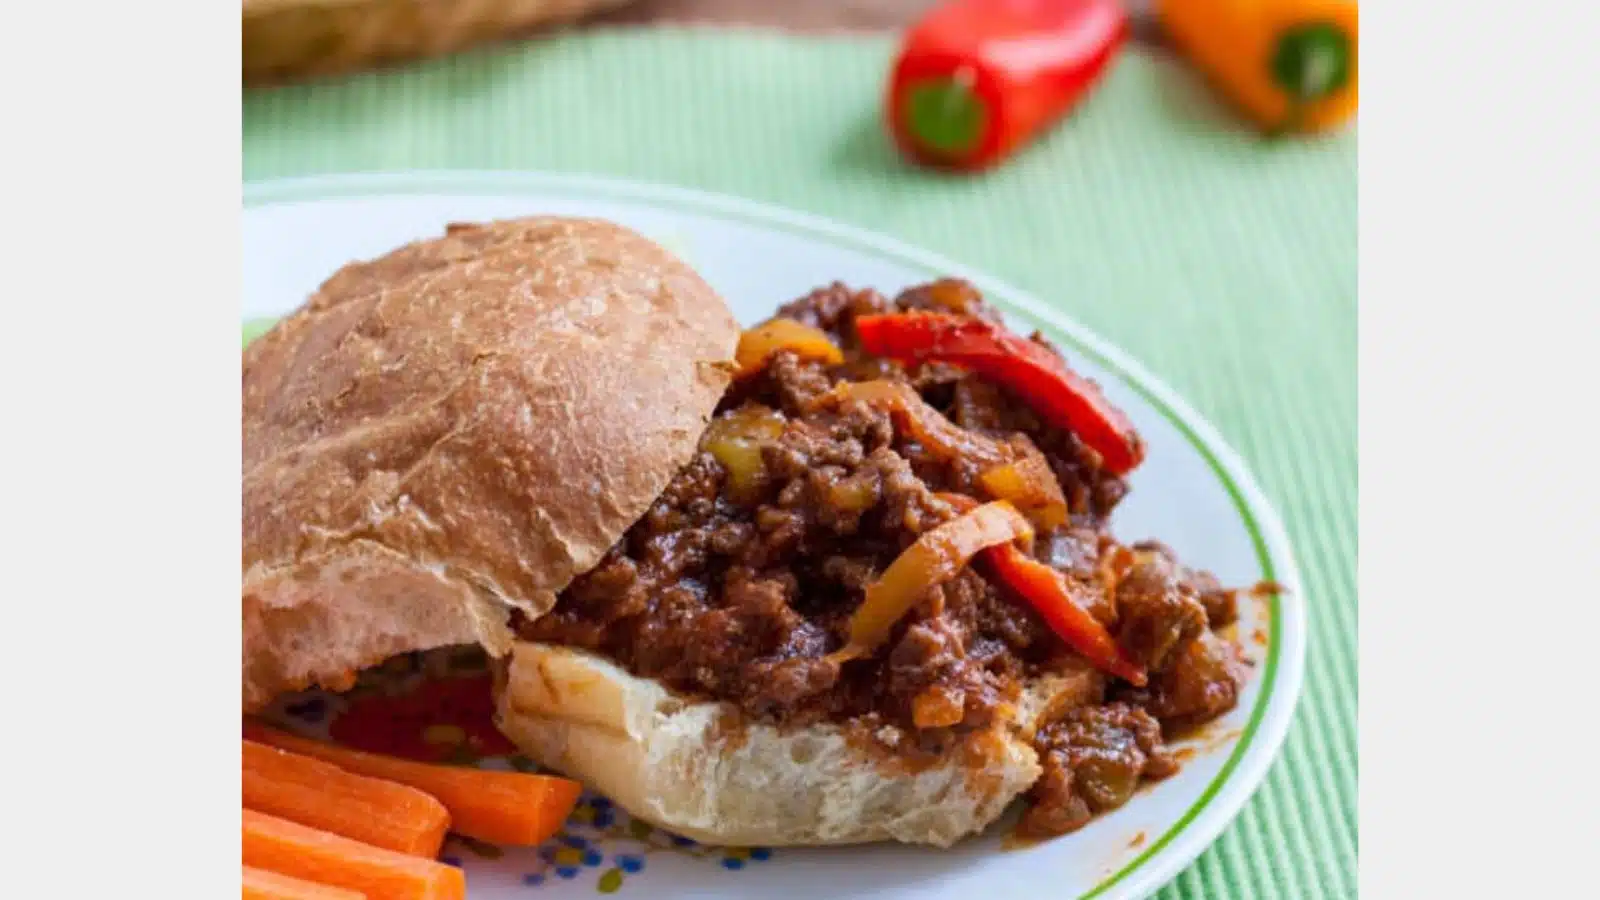 a plate with sloppy joes on a bun with carrots, and peppers in the back